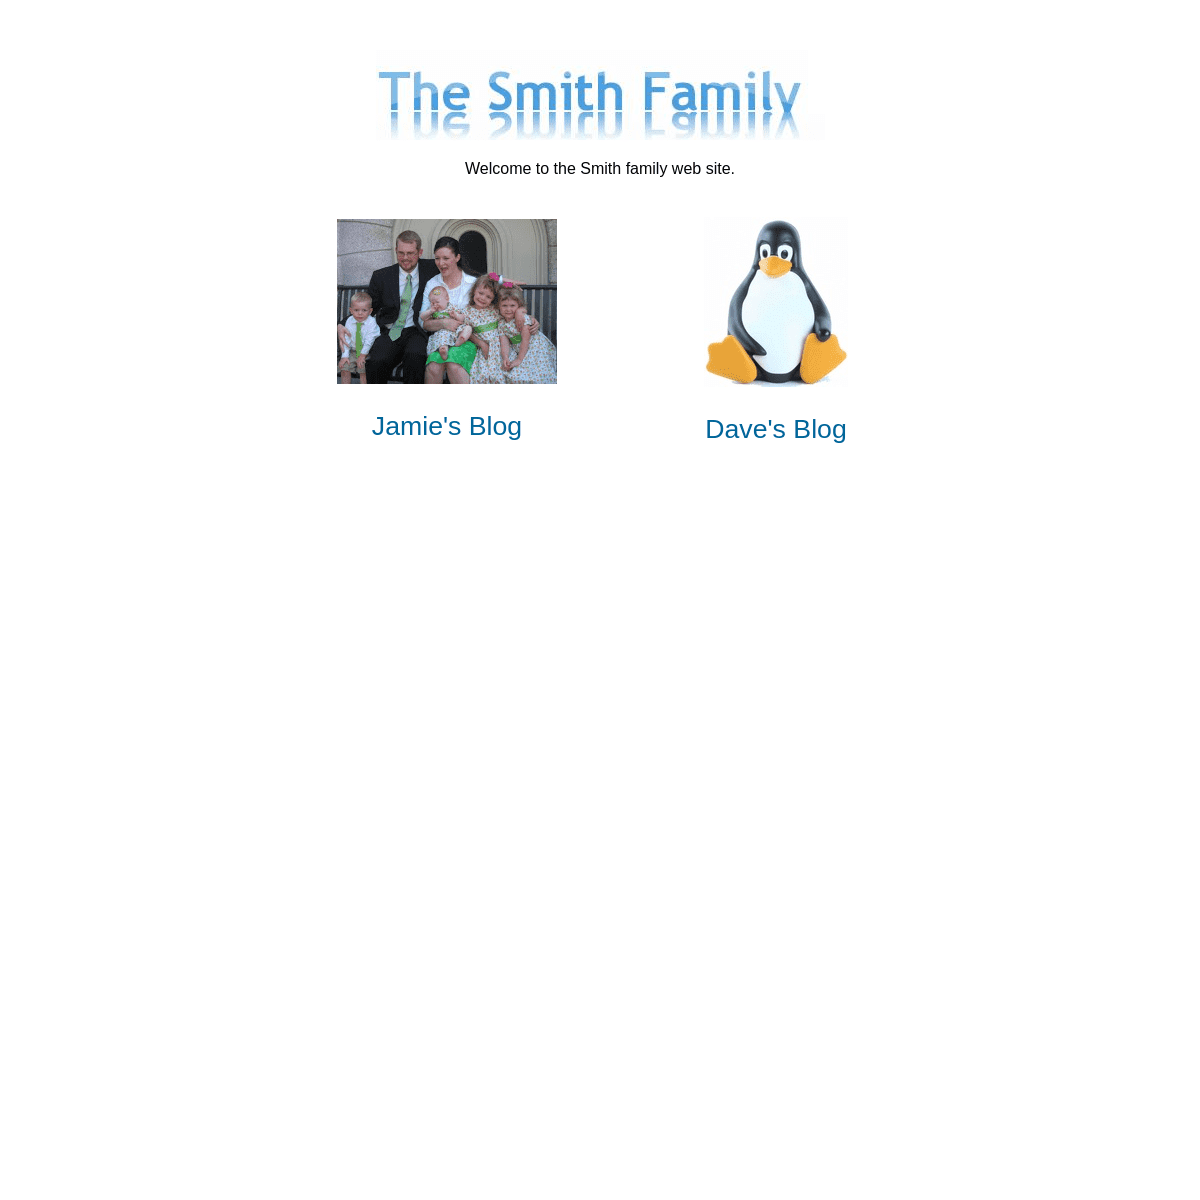 The Smith Family Web Site